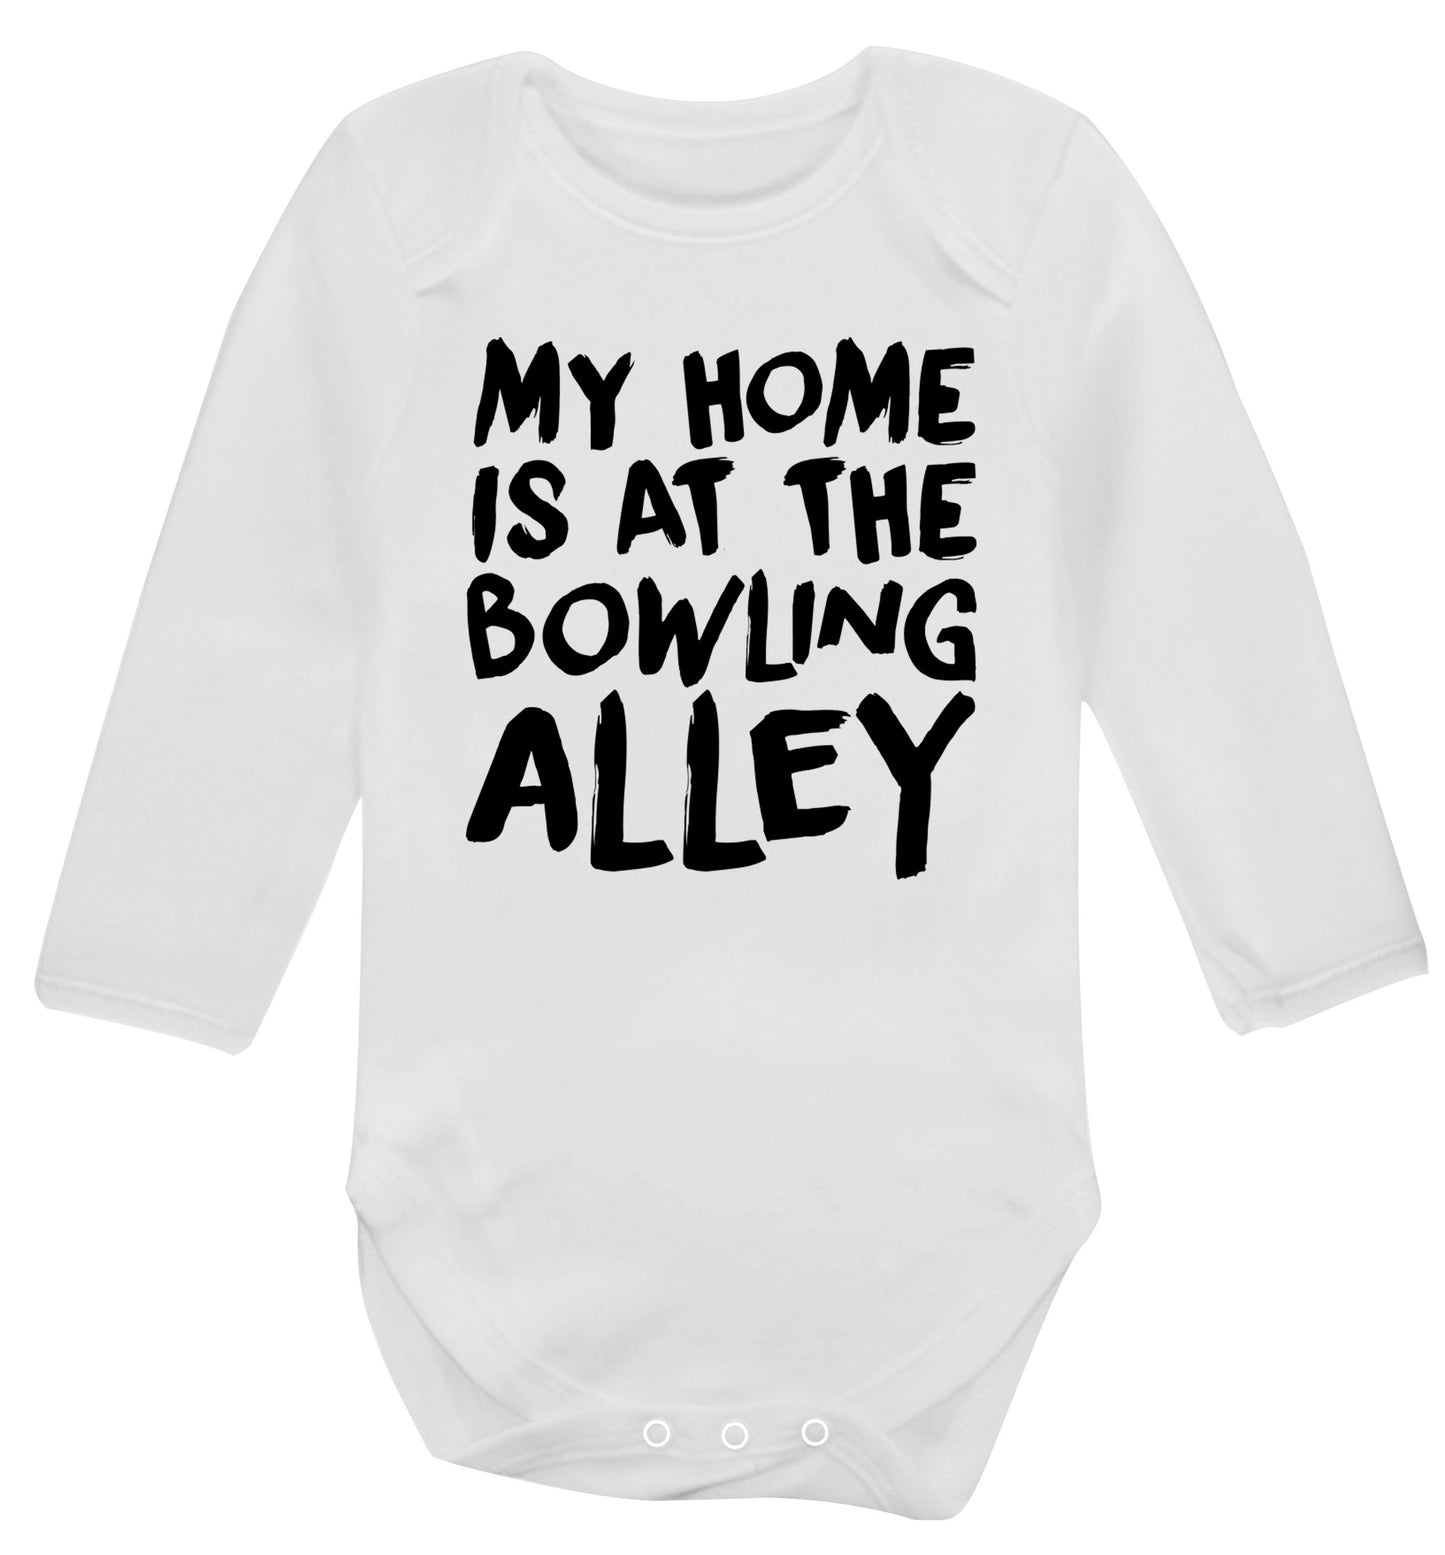 My home is at the bowling alley Baby Vest long sleeved white 6-12 months